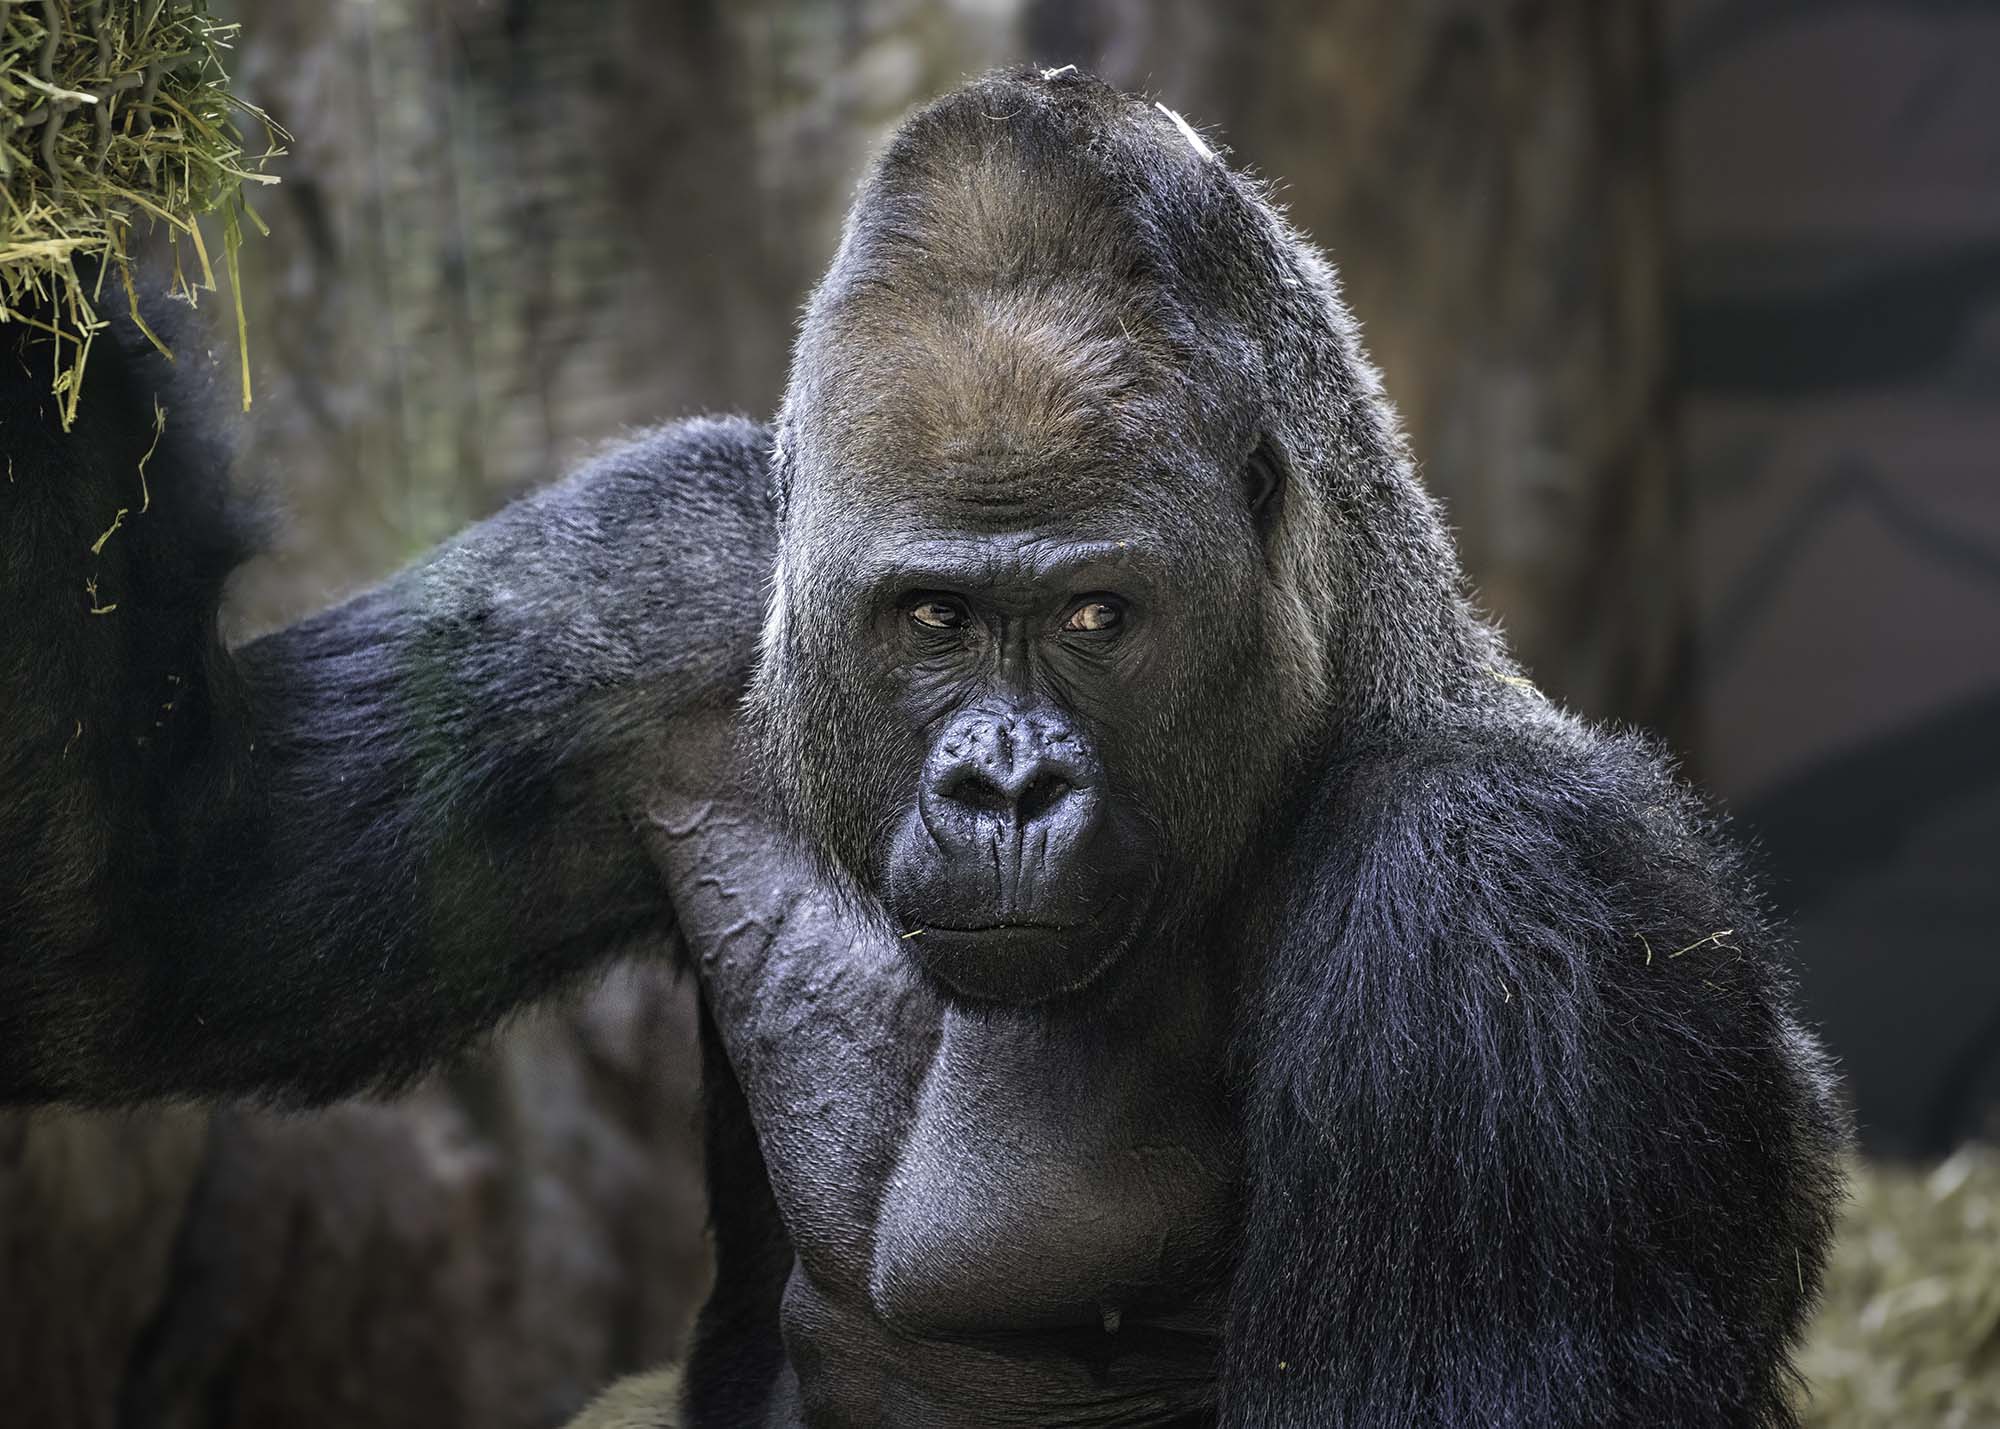 Close-up of a gorilla with its face forward and its eyes to the side